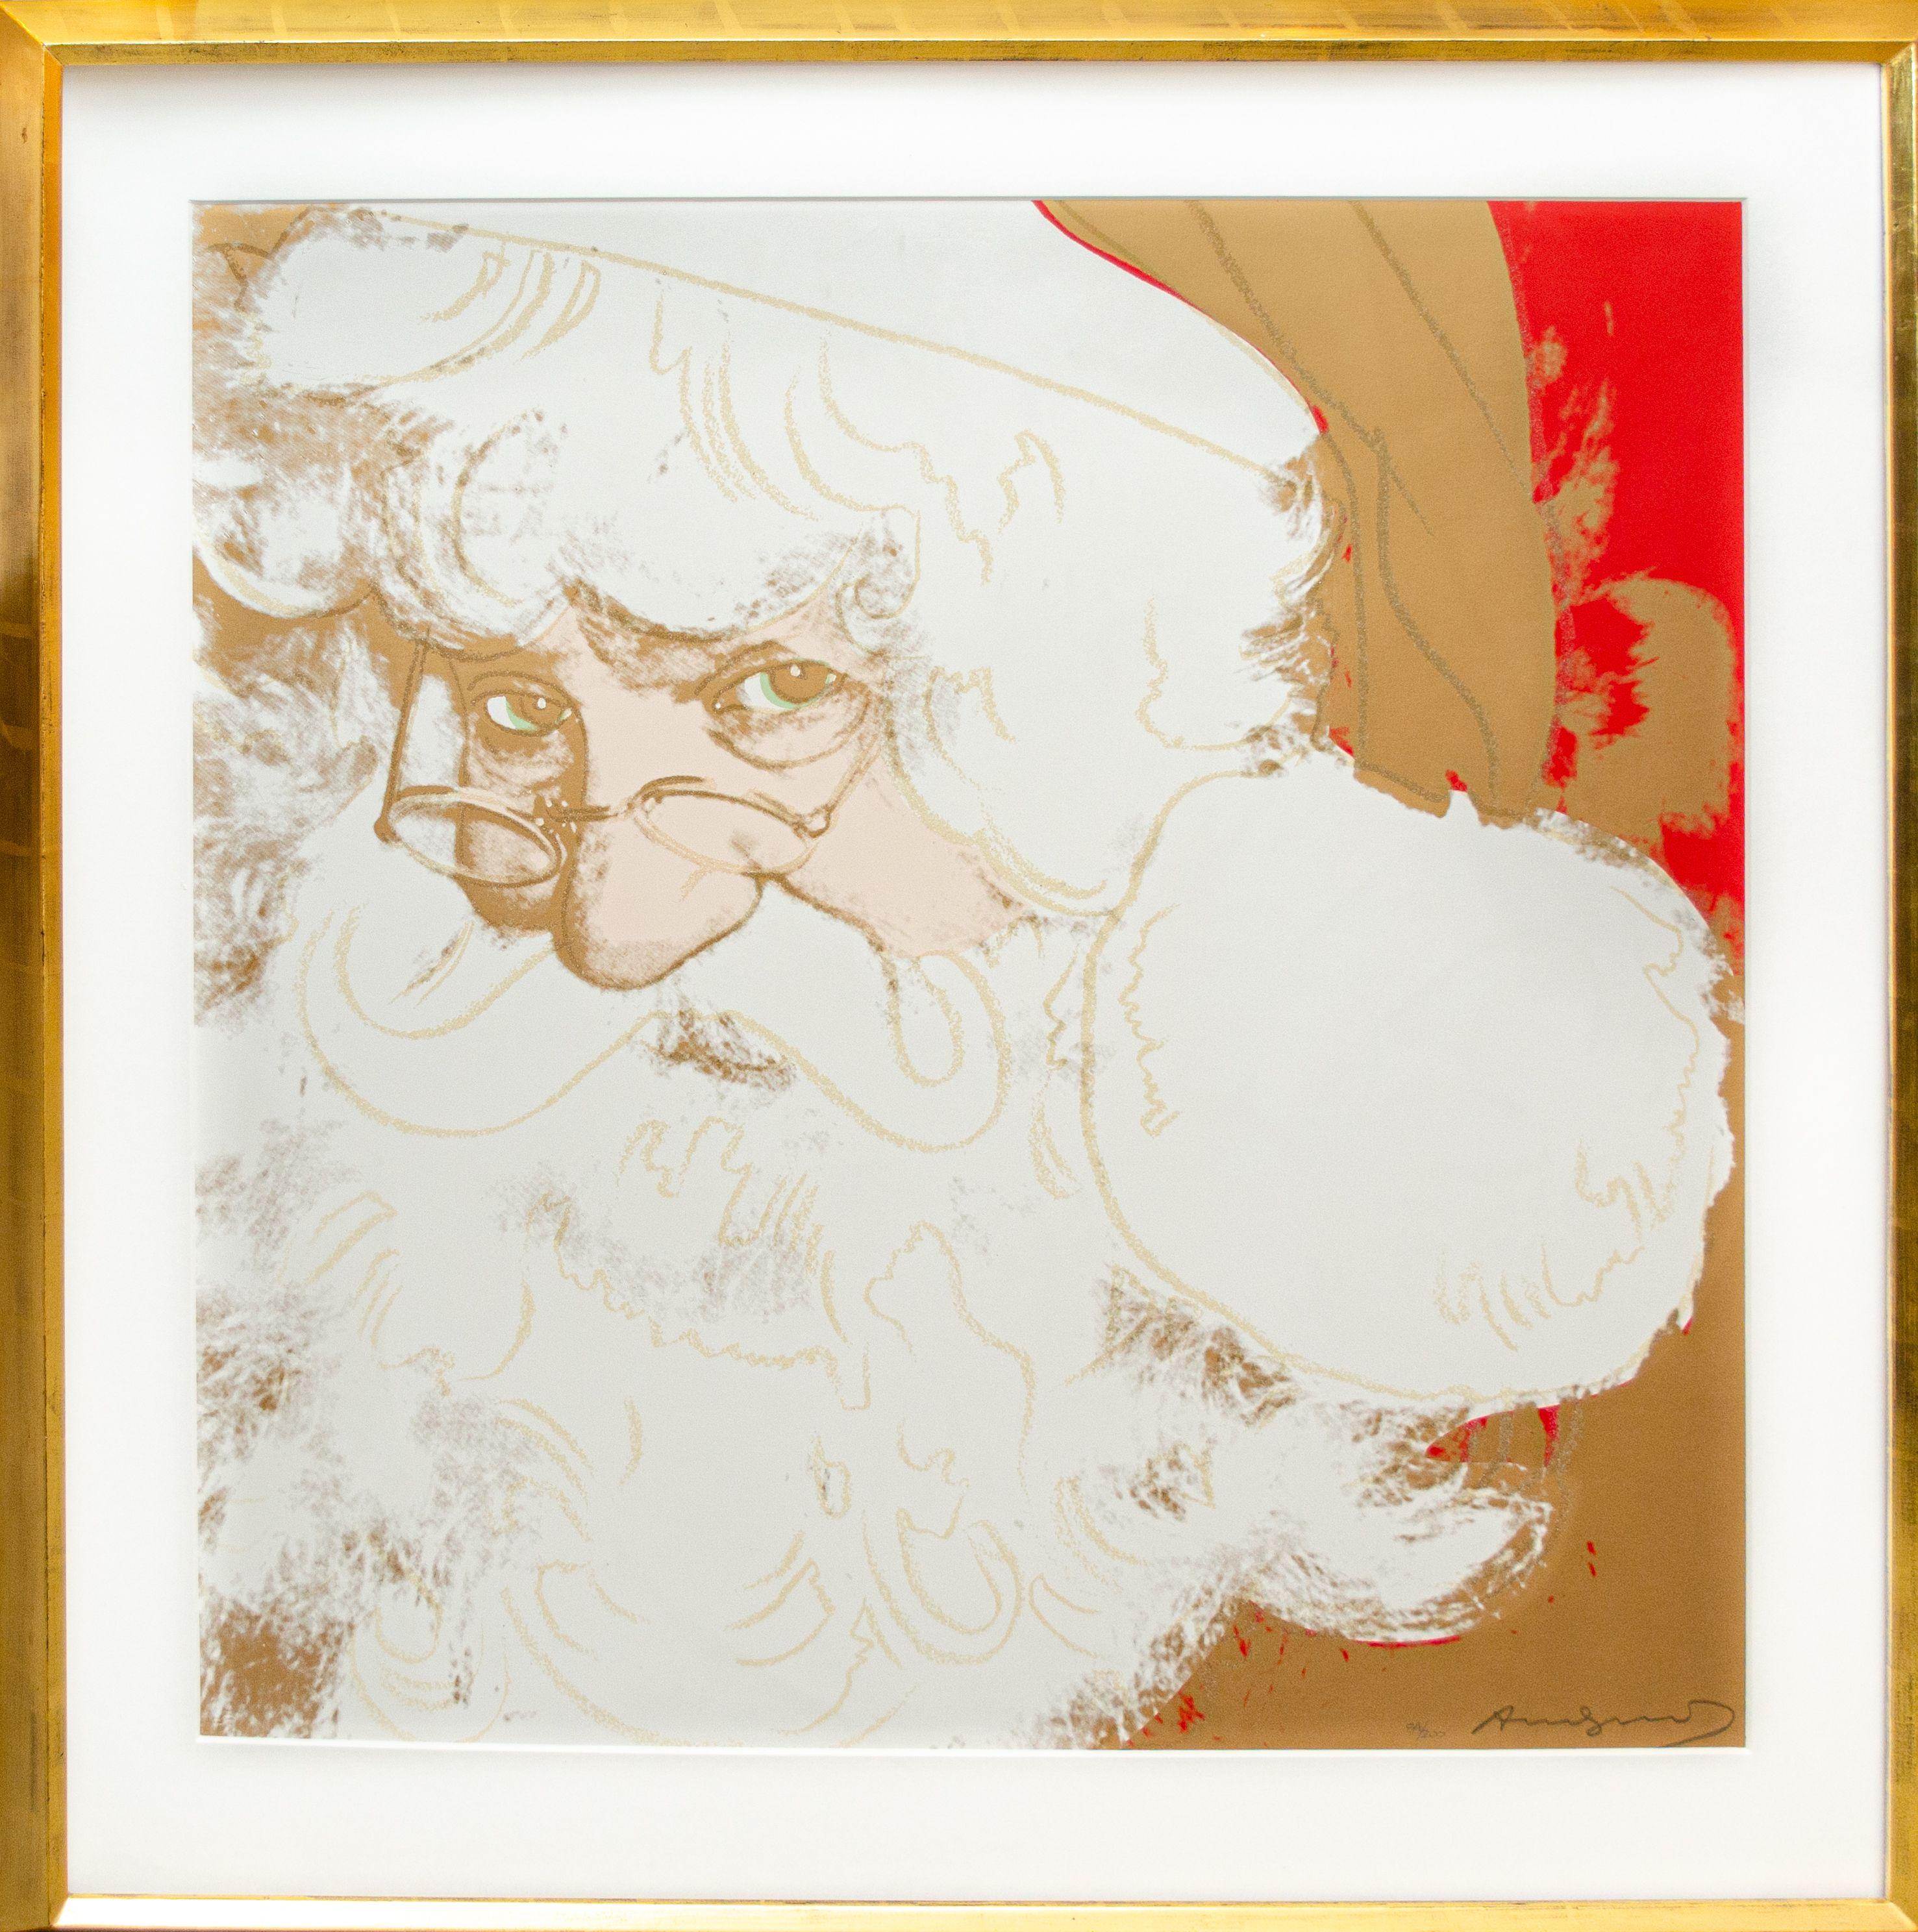 Andy Warhol's 'Santa Claus' is a print from his collection Myths, which depicts revered characters from American culture. To convey the mysticism of celebrity, this piece has diamond dust sprinkled across the surface. It is signed, numbered and